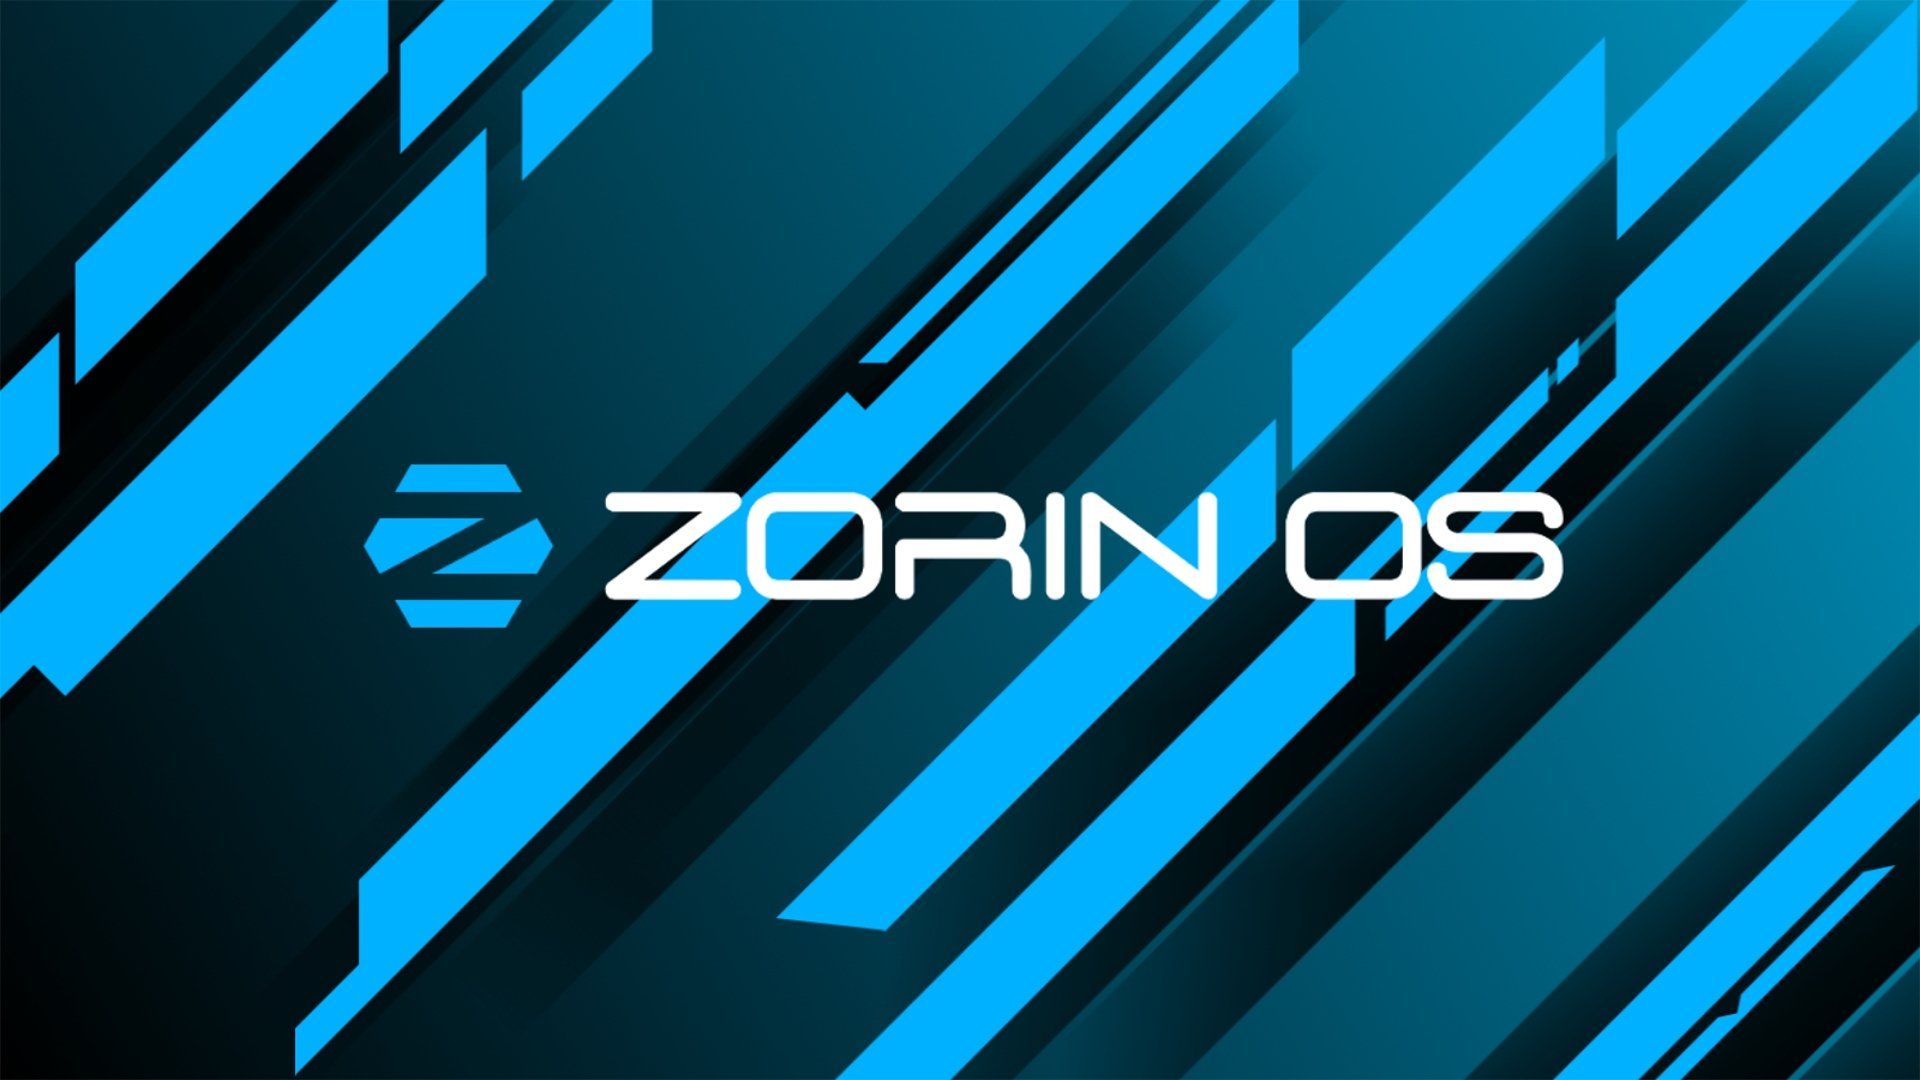 Zorin Gallery Wallpapers for Free Best HQFX Backgrounds.